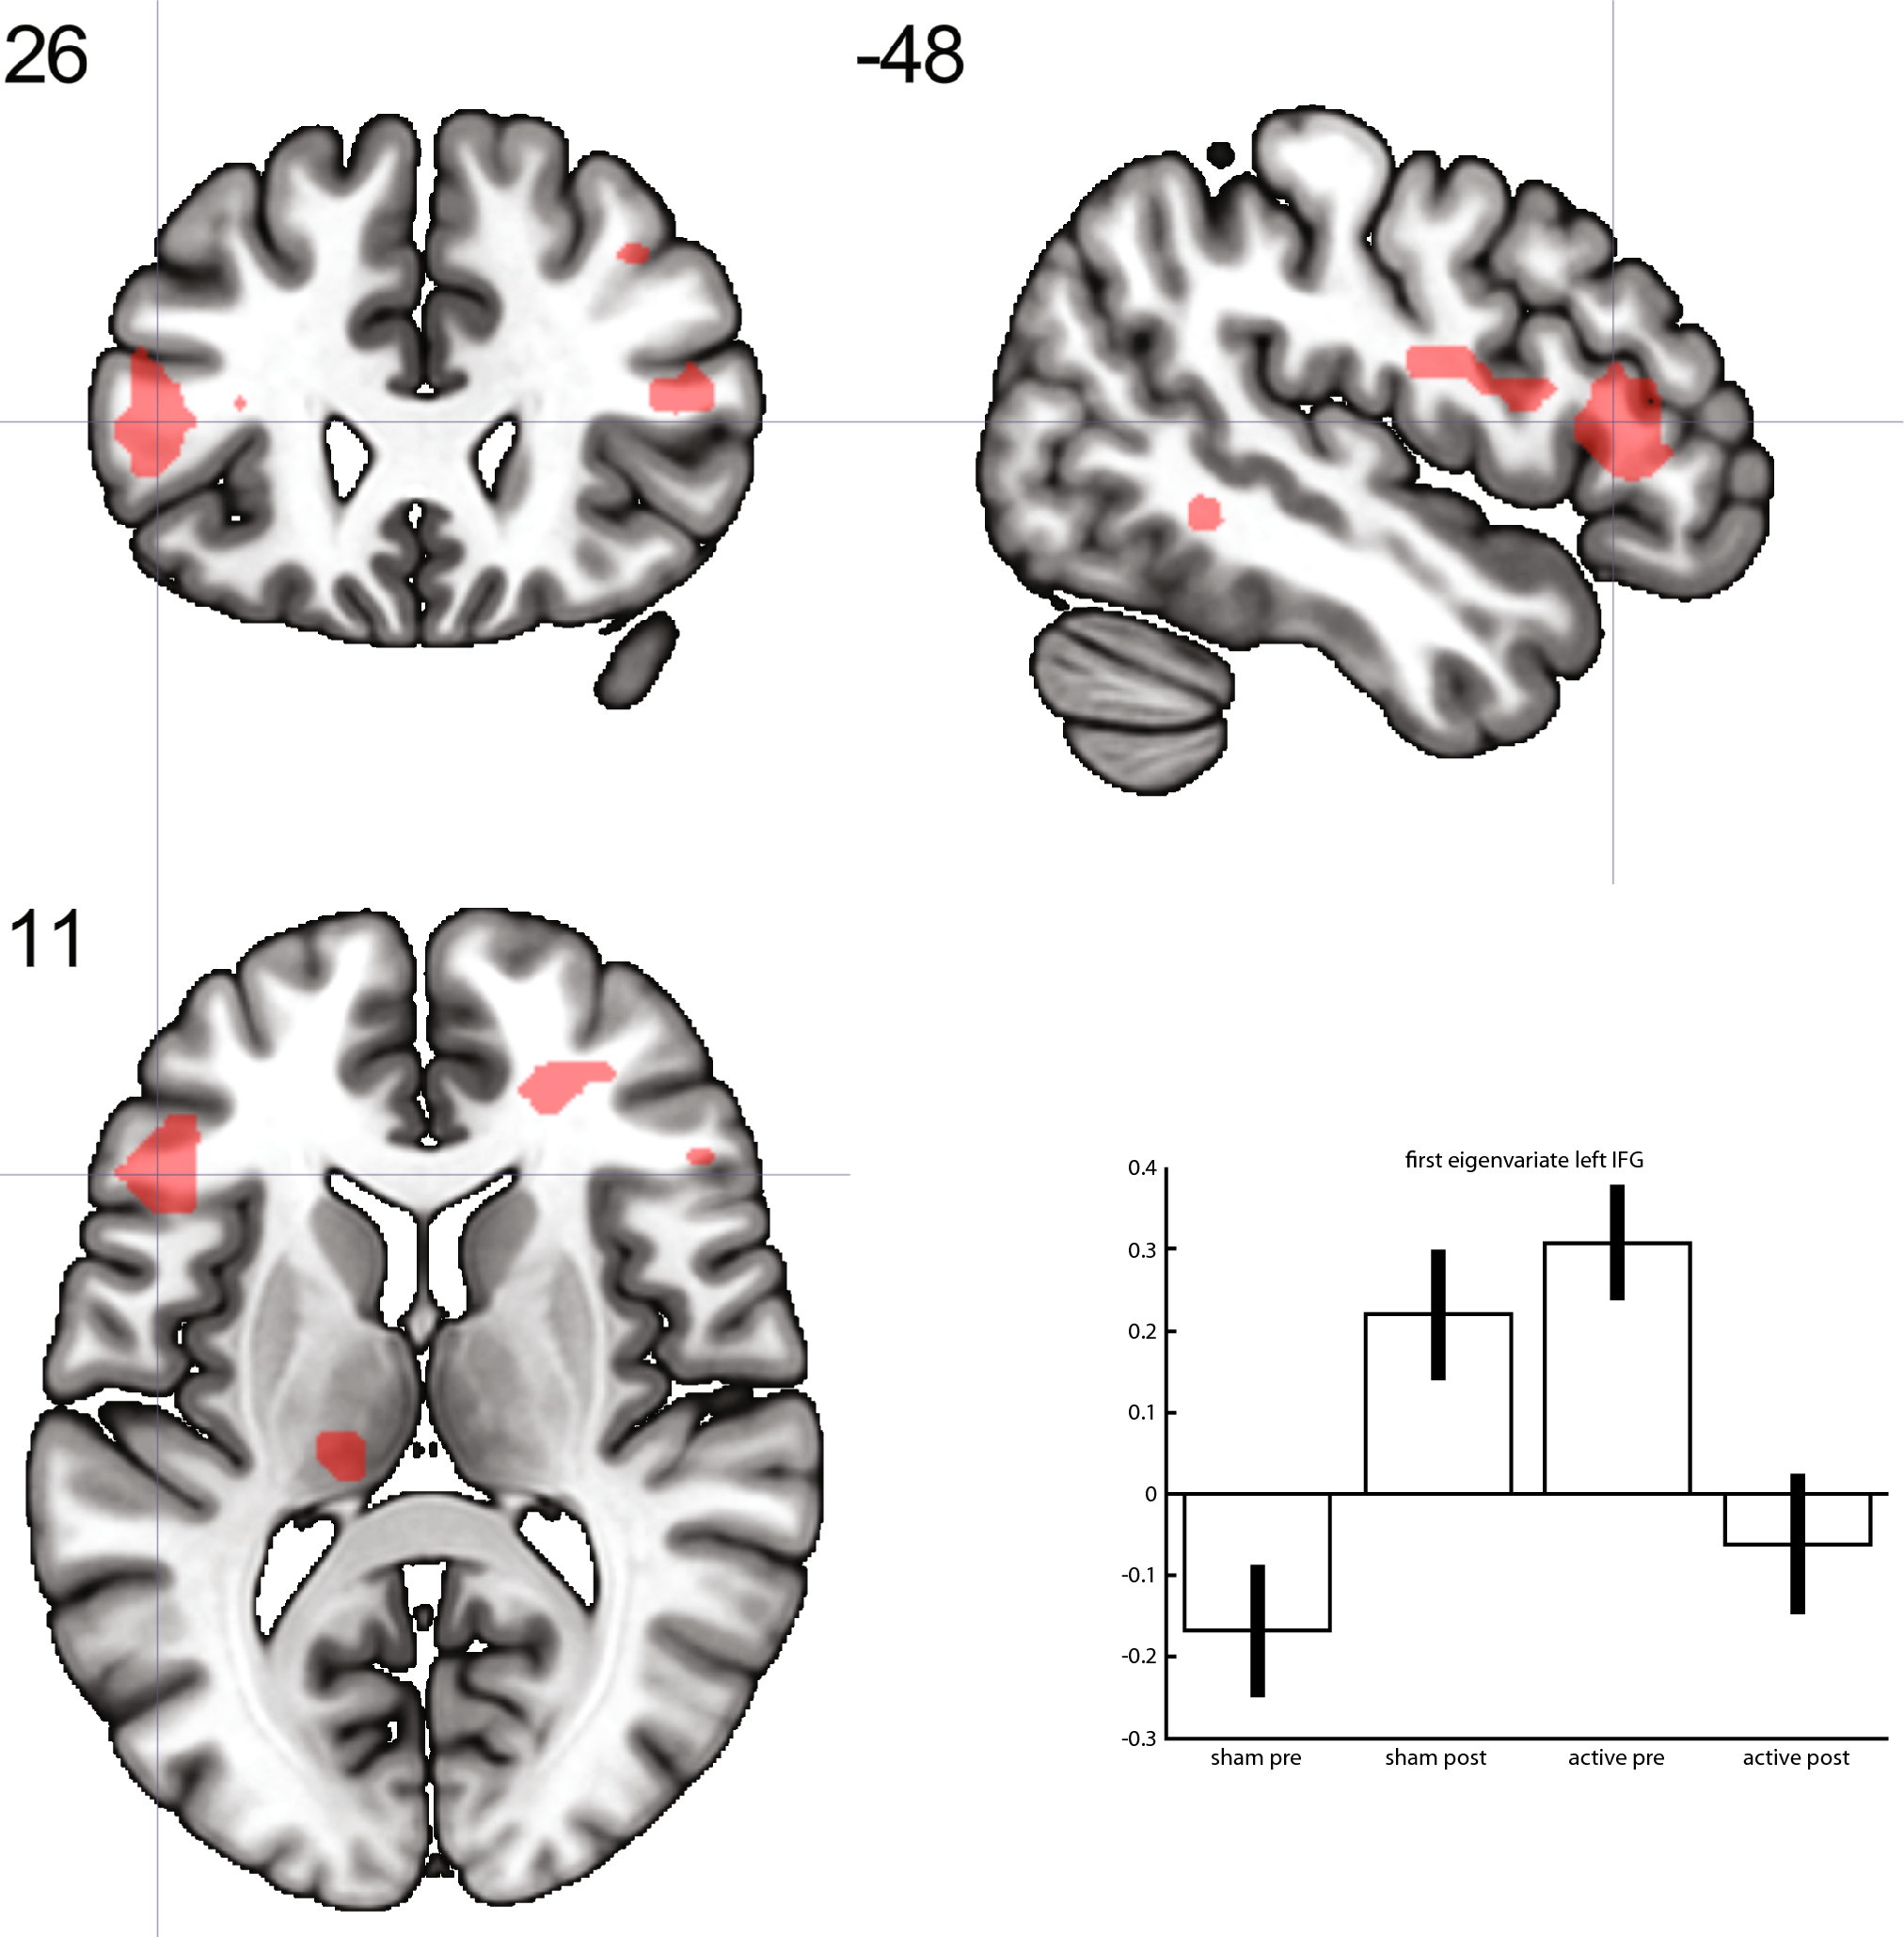 Change in brain activation after transcranial pulsed electromagnetic fields in treatment-resistant depression